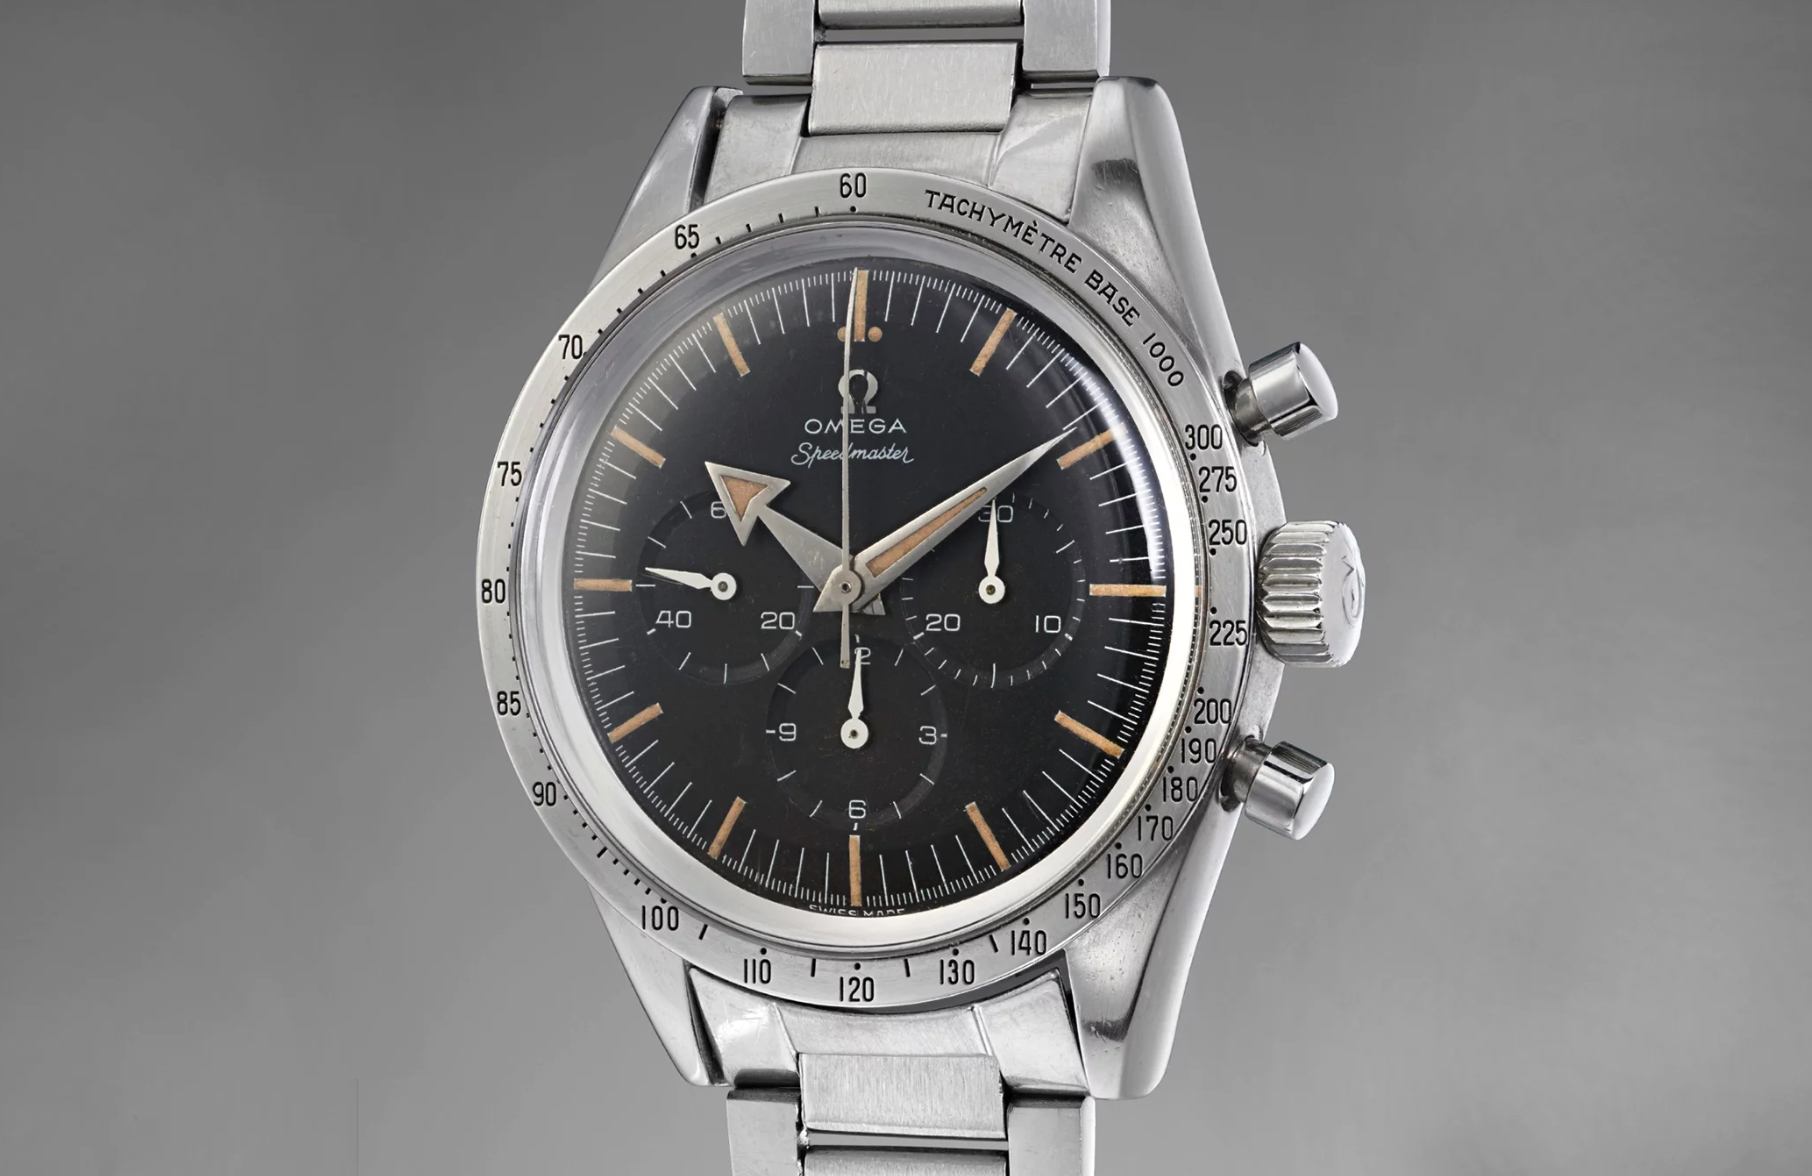 Speedmaster Breaks All-Time Auction Record